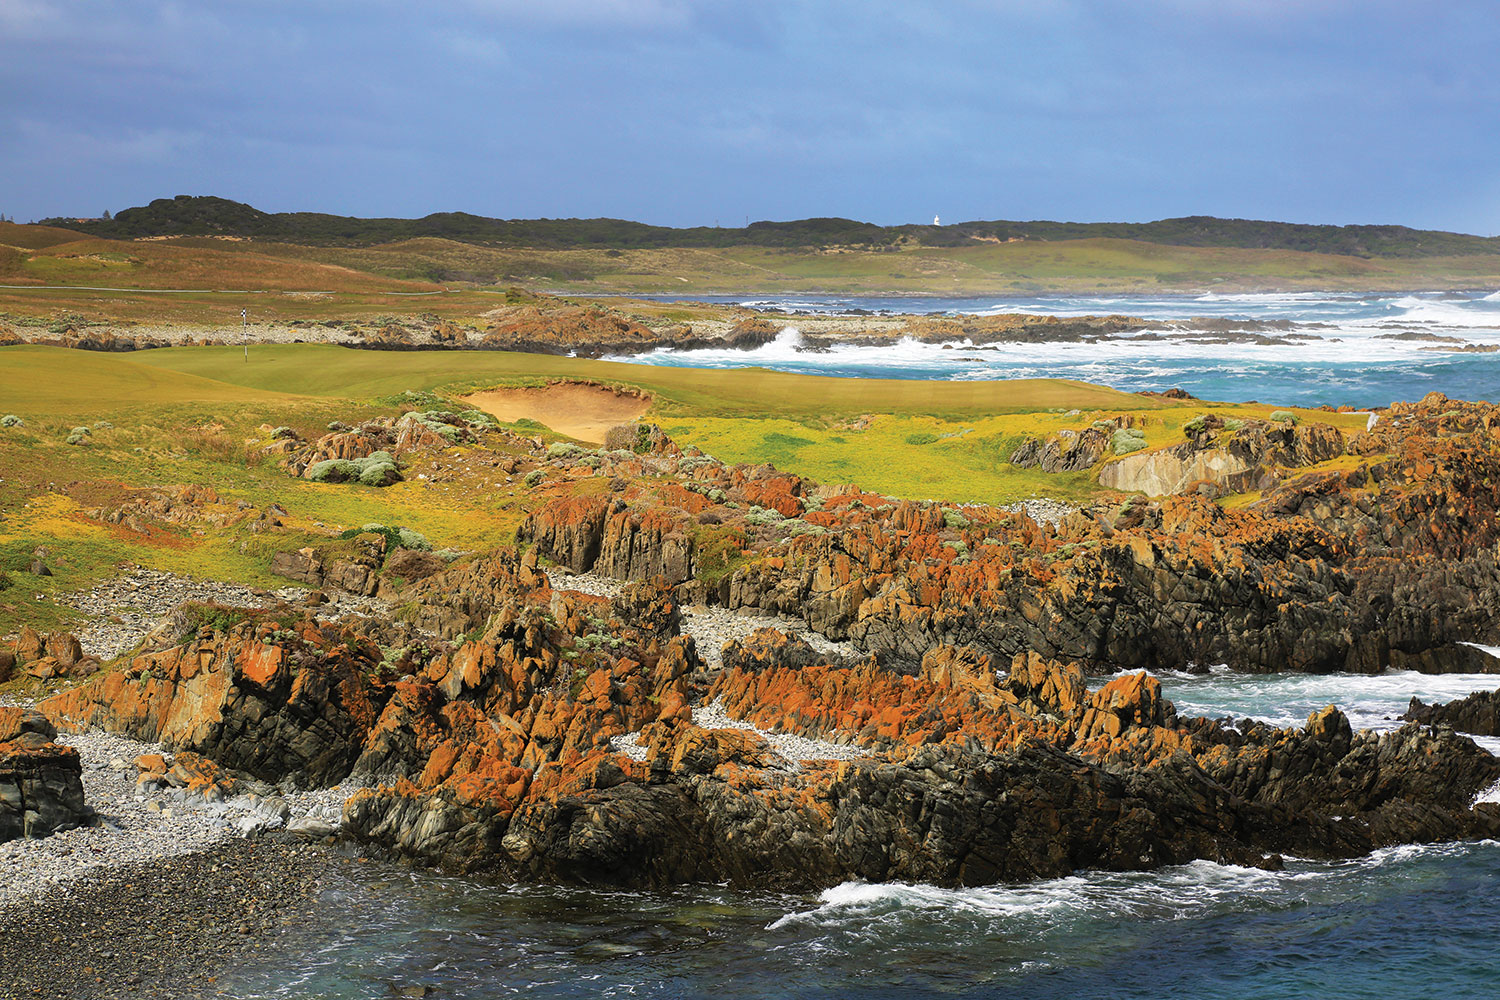 The tiny fourth hole juts into the ocean and can be a frightening prospect to par.